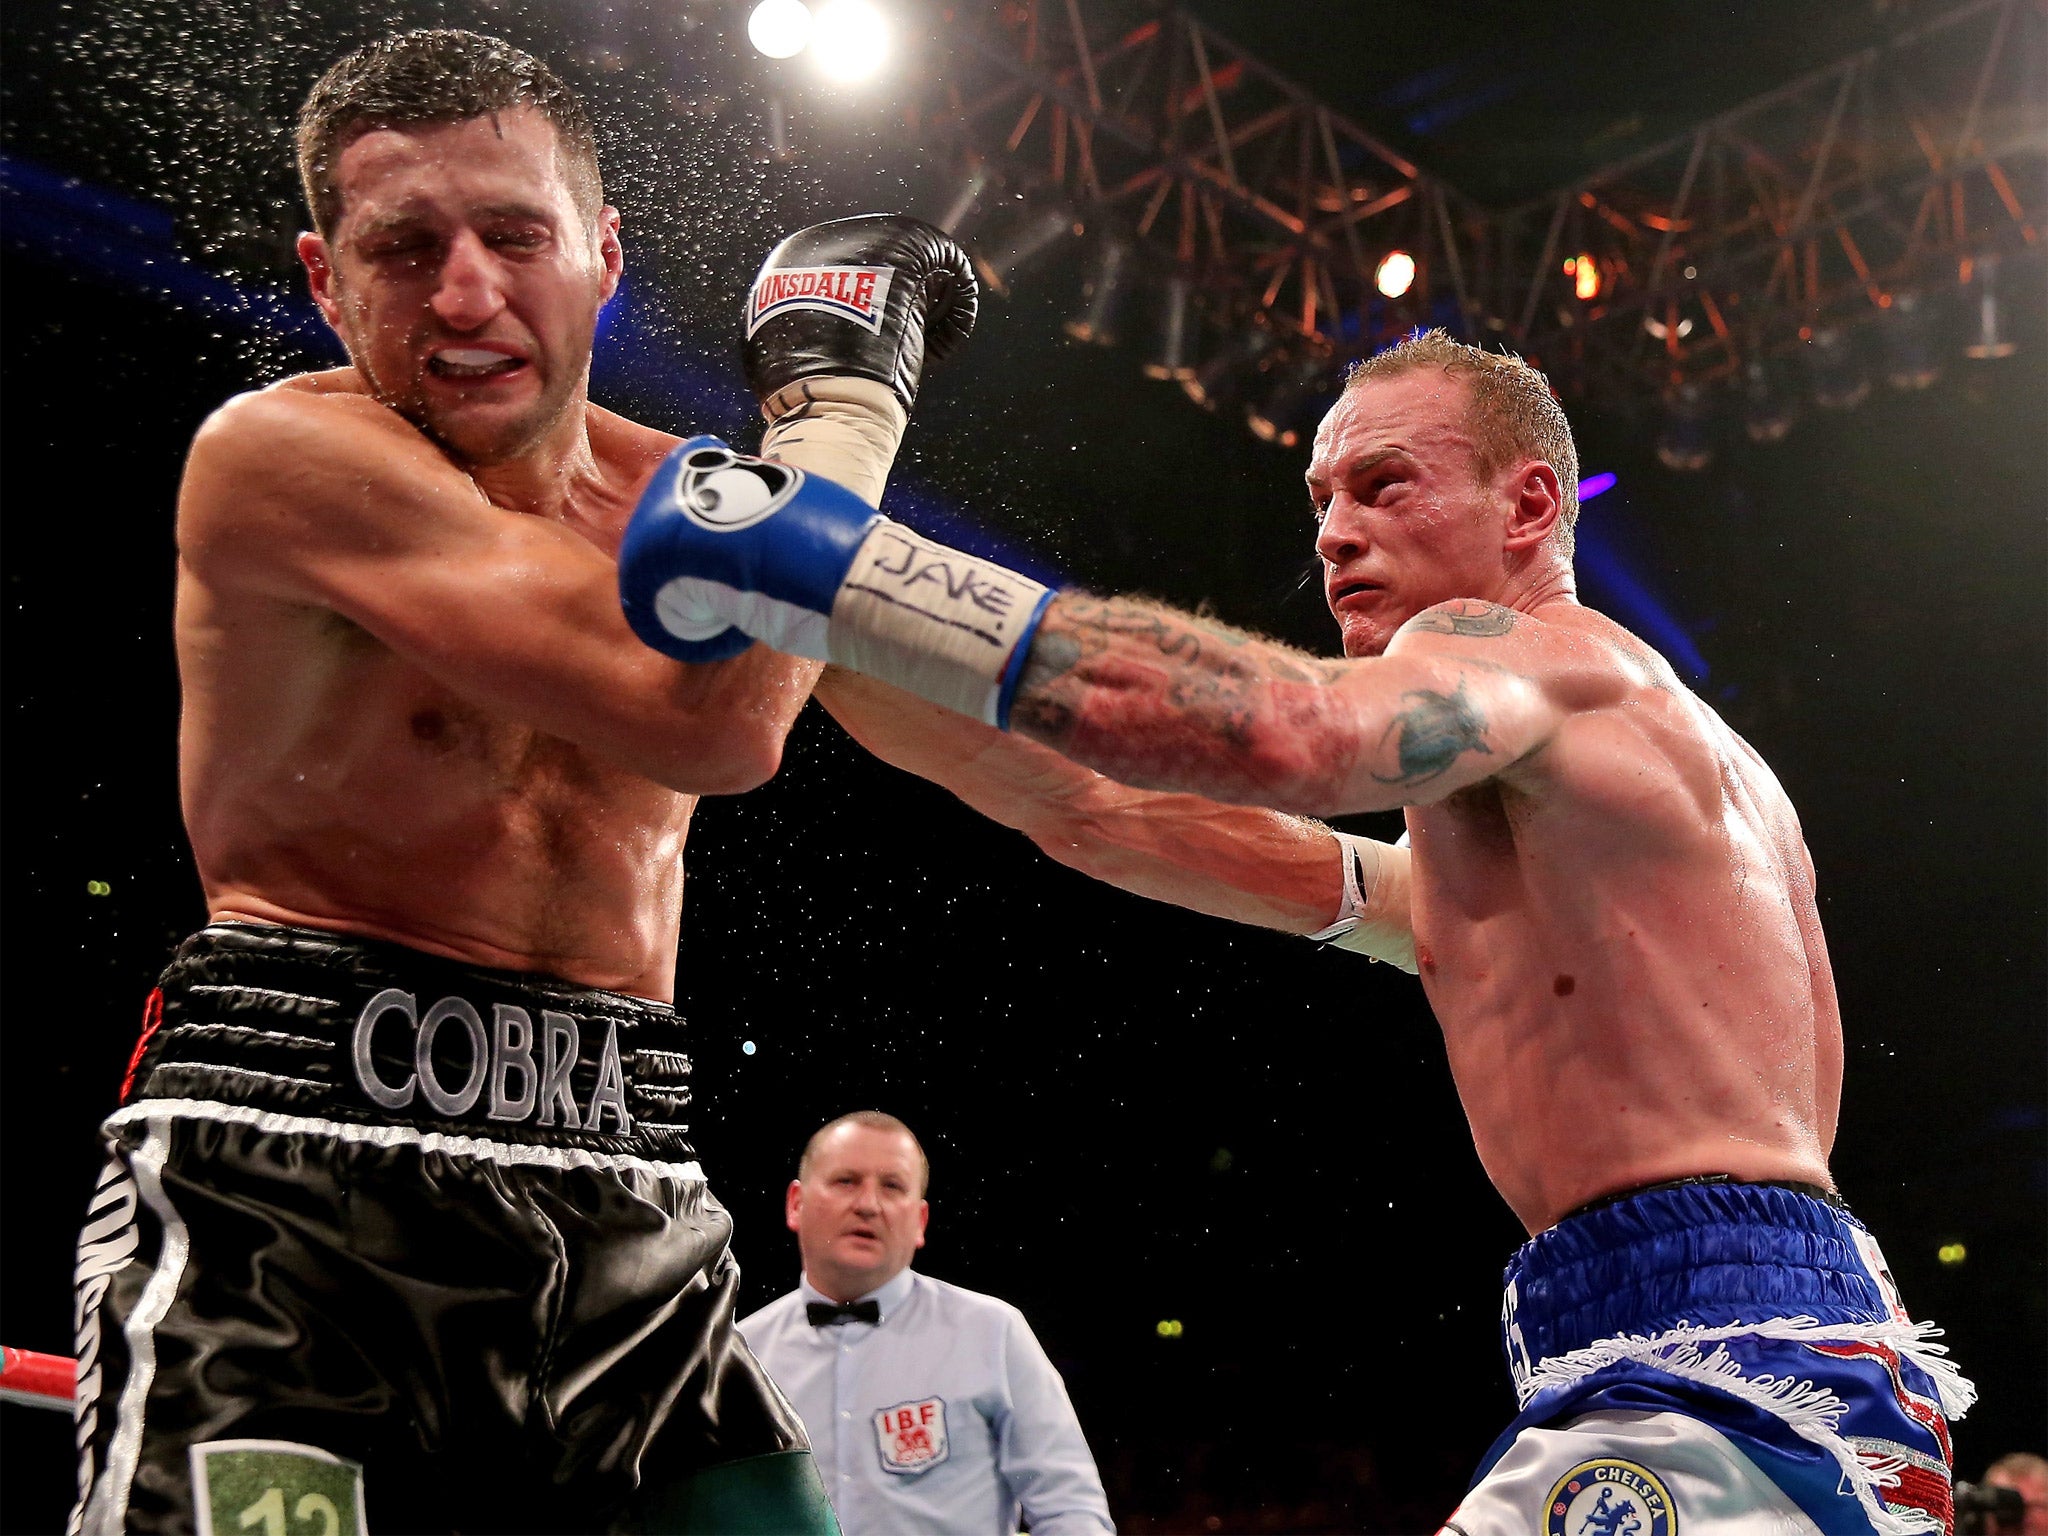 George Groves lands a stiff left on Carl Froch's chin during their controversial first fight